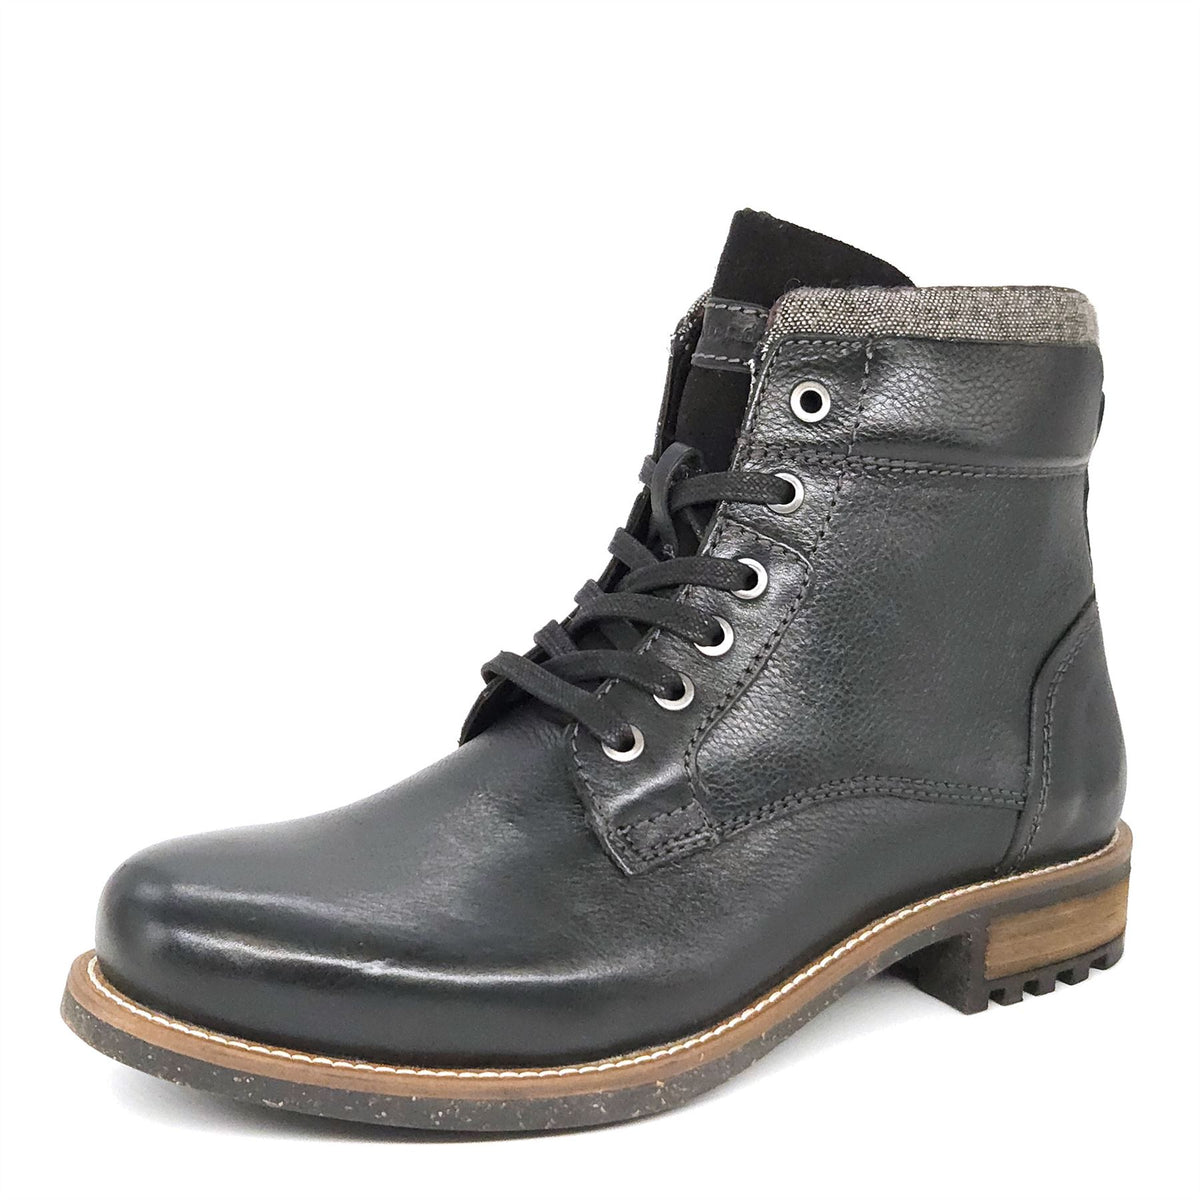 Hounslow Lace Up Boots